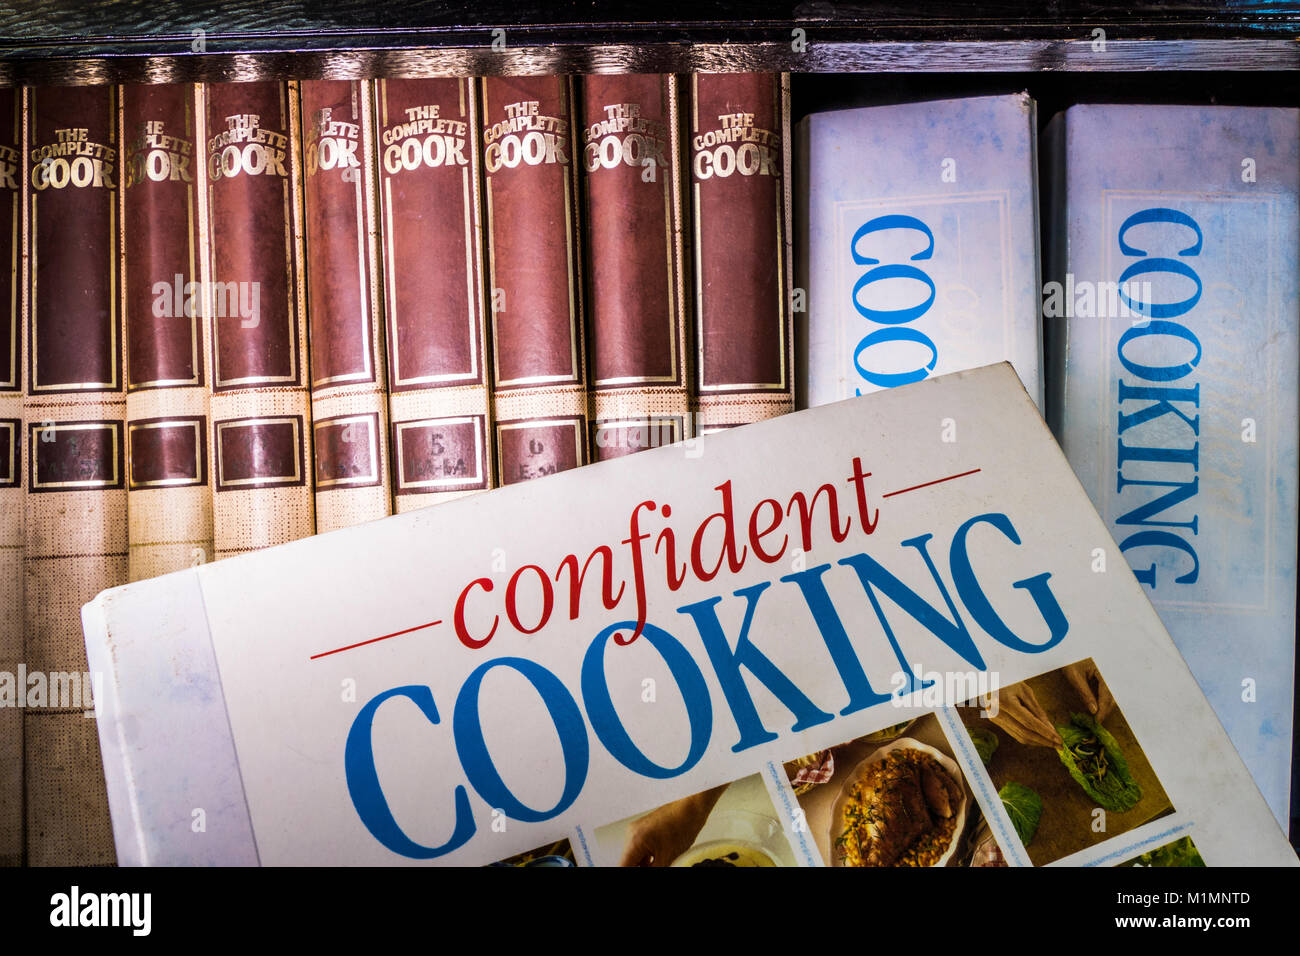 Assortment of self-help, hardback, cookery books with recipes, in a row on a book case, with one entitled ‘Confident Cooking’ at the front. UK. Stock Photo